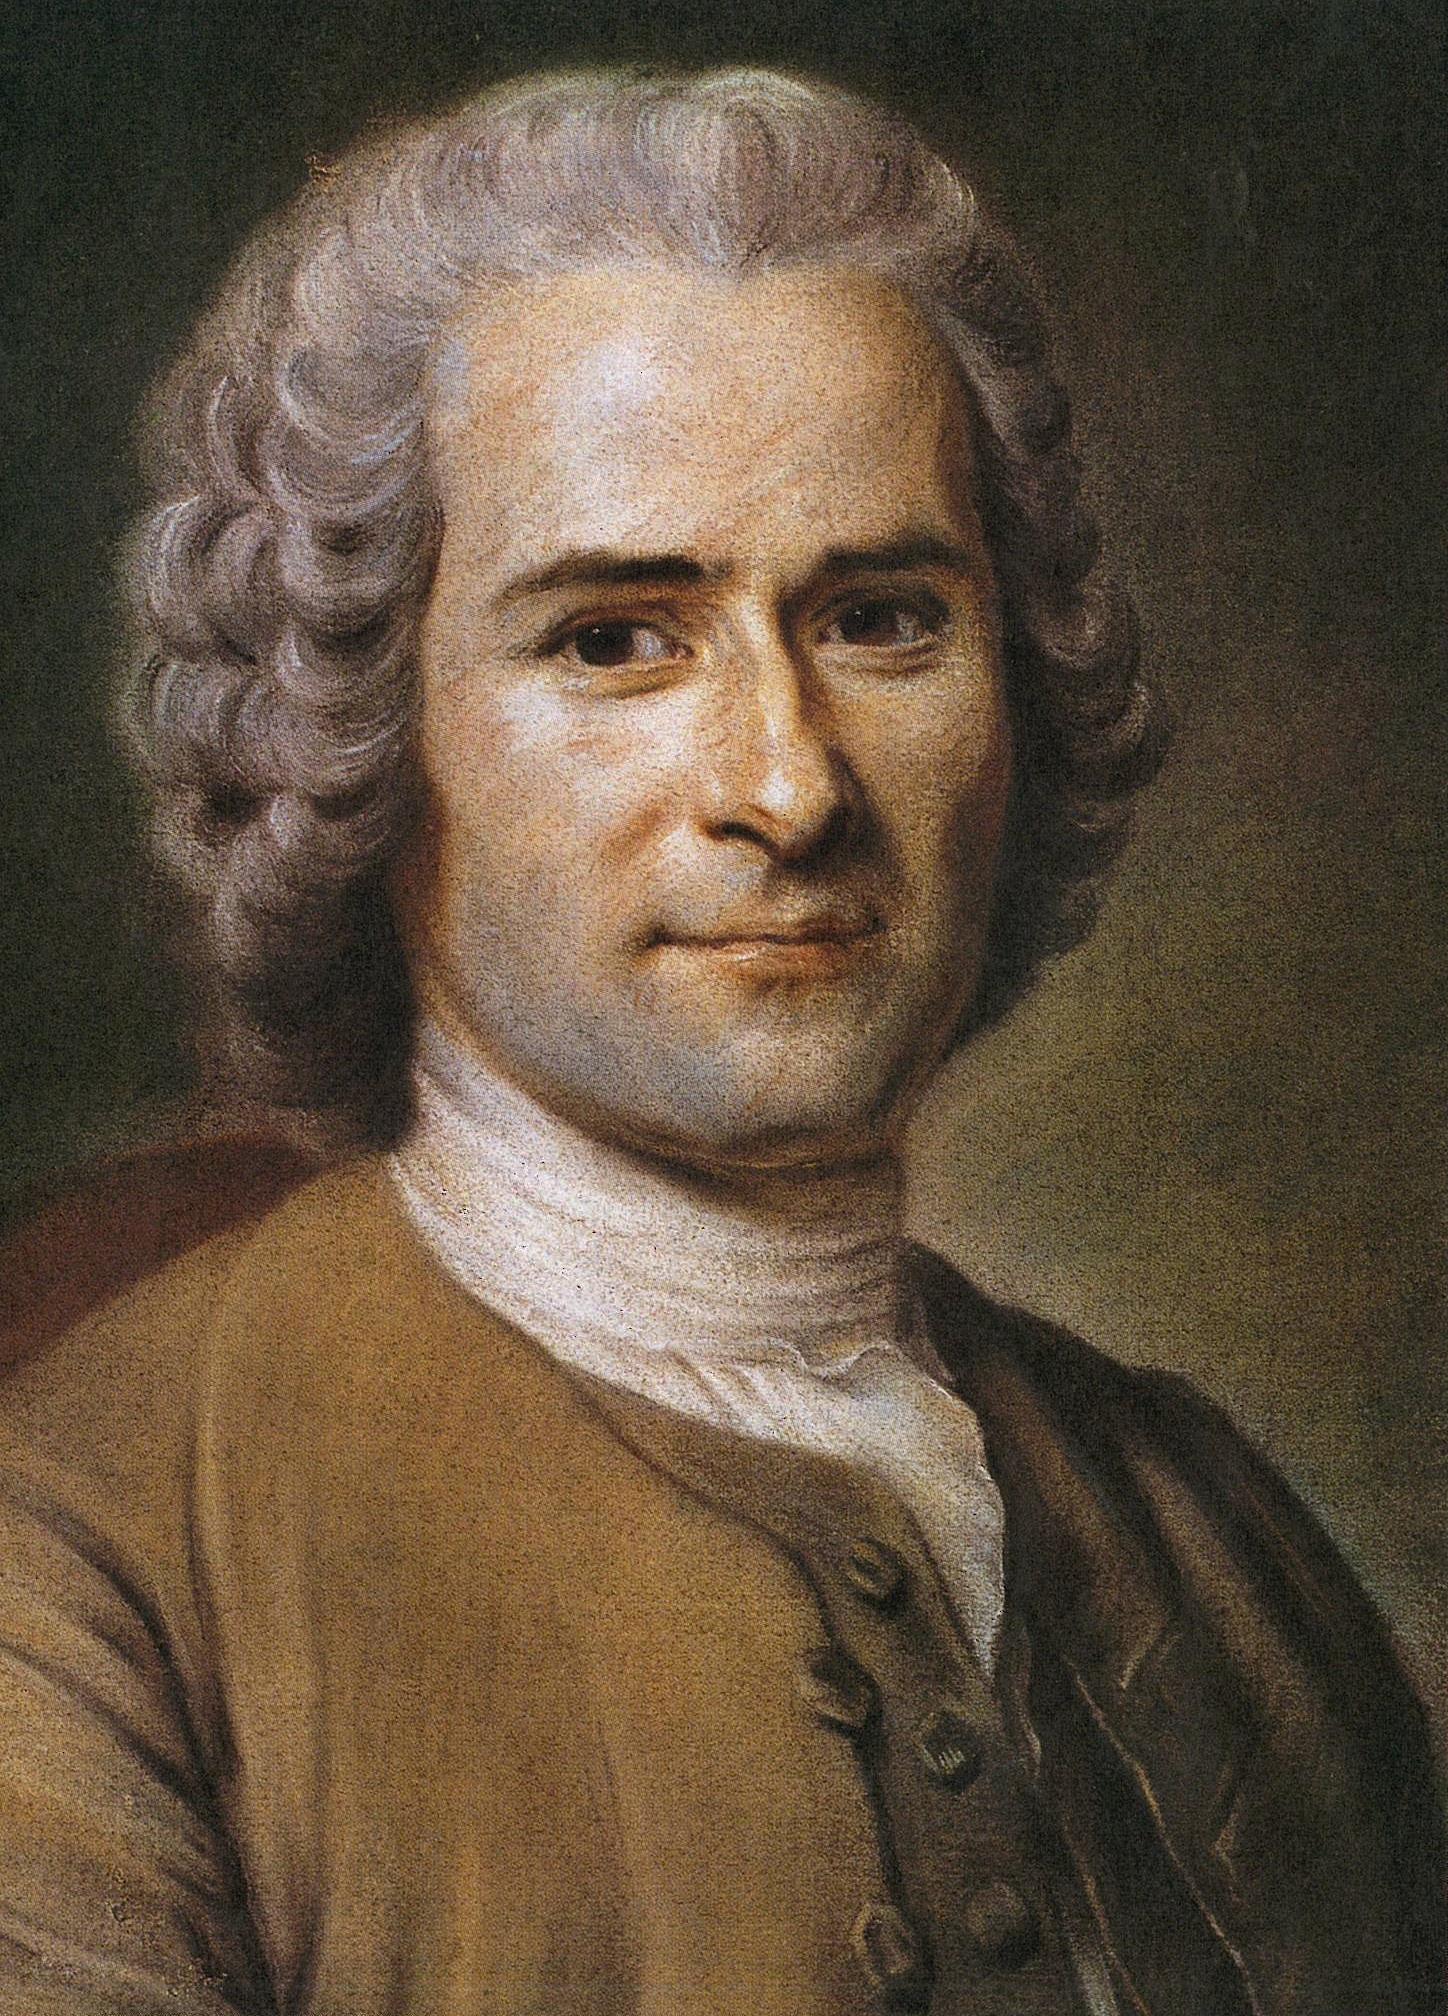 Portrait of Jean-Jacques Rousseau painted by Maurice Quentin de La Tour. Source                               http://upload.wikimedia.org/wikipedia/commons/b/b7/Jean-Jacques_Rousseau_%28painted_portrait%29.jpg